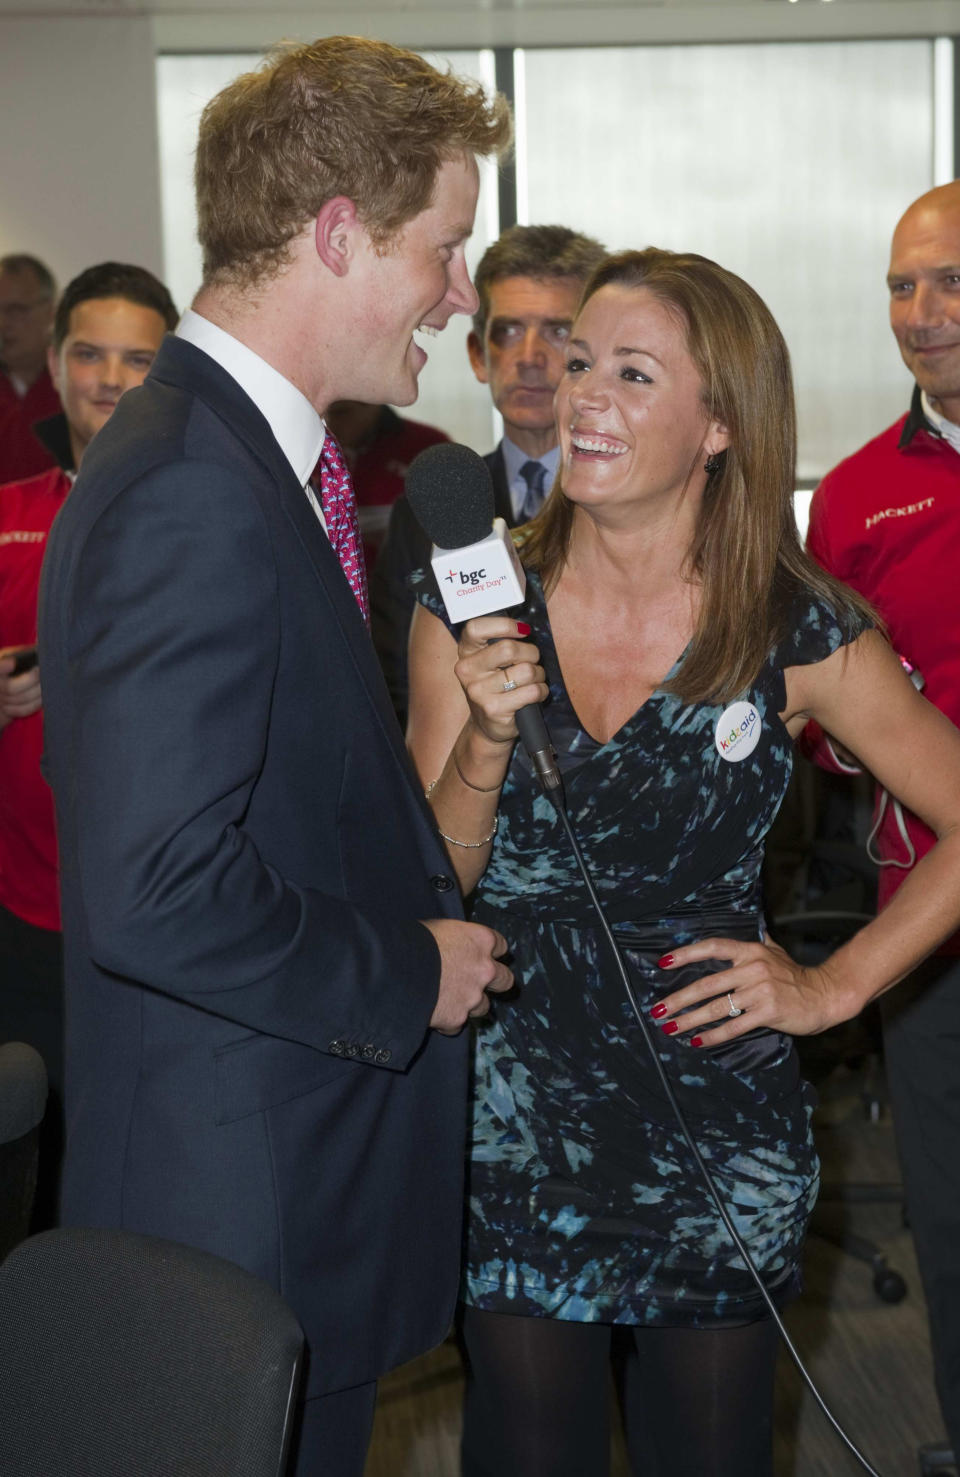 Britain's Prince Harry talks to British TV and radio presenter Natalie Pinkham on the trading floor as he attends BGC Partners' Charity Day in London, on September 12, 2011. Britain's Prince Harry, co-founder and Patron of Sentebale, today attended BGC Partners’ Charity Day, which is held each year to commemorate the company’s 658 employees who lost their lives in the 9/11 attacks on the World Trade Center. Prince Harry helped raise money for Sentebale and other charities by supporting BGC Partners in deals on the trading floor. AFP PHOTO / PAUL GROVER / POOL (Photo credit should read PAUL GROVER/AFP via Getty Images)